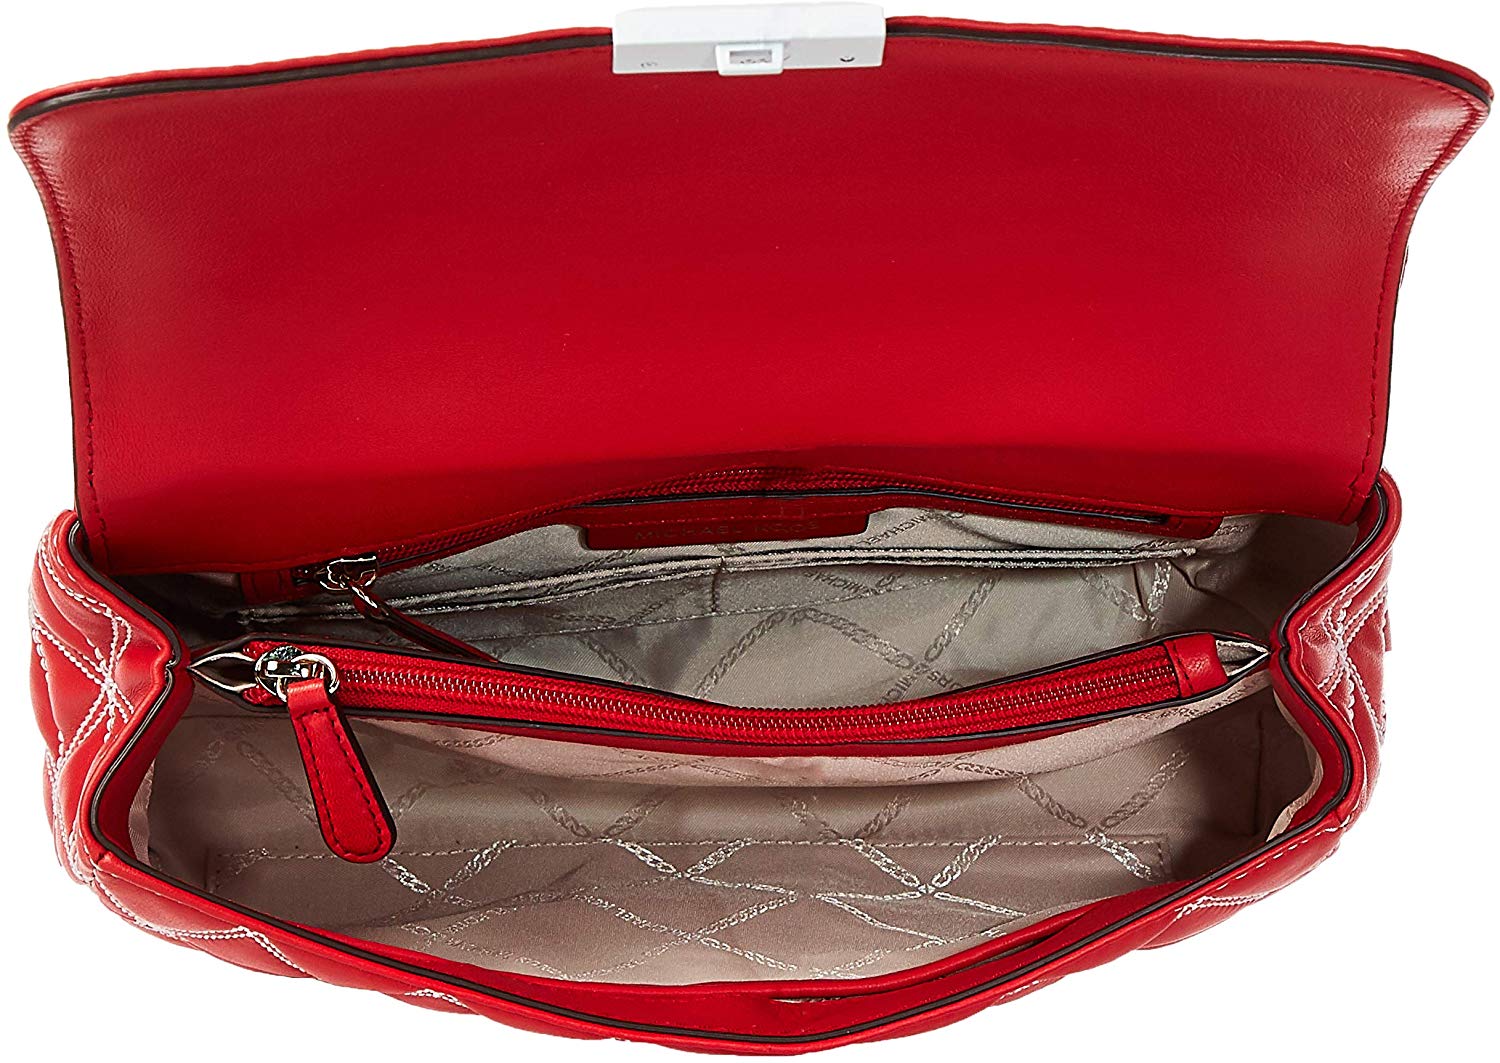 red leather michael kors purse